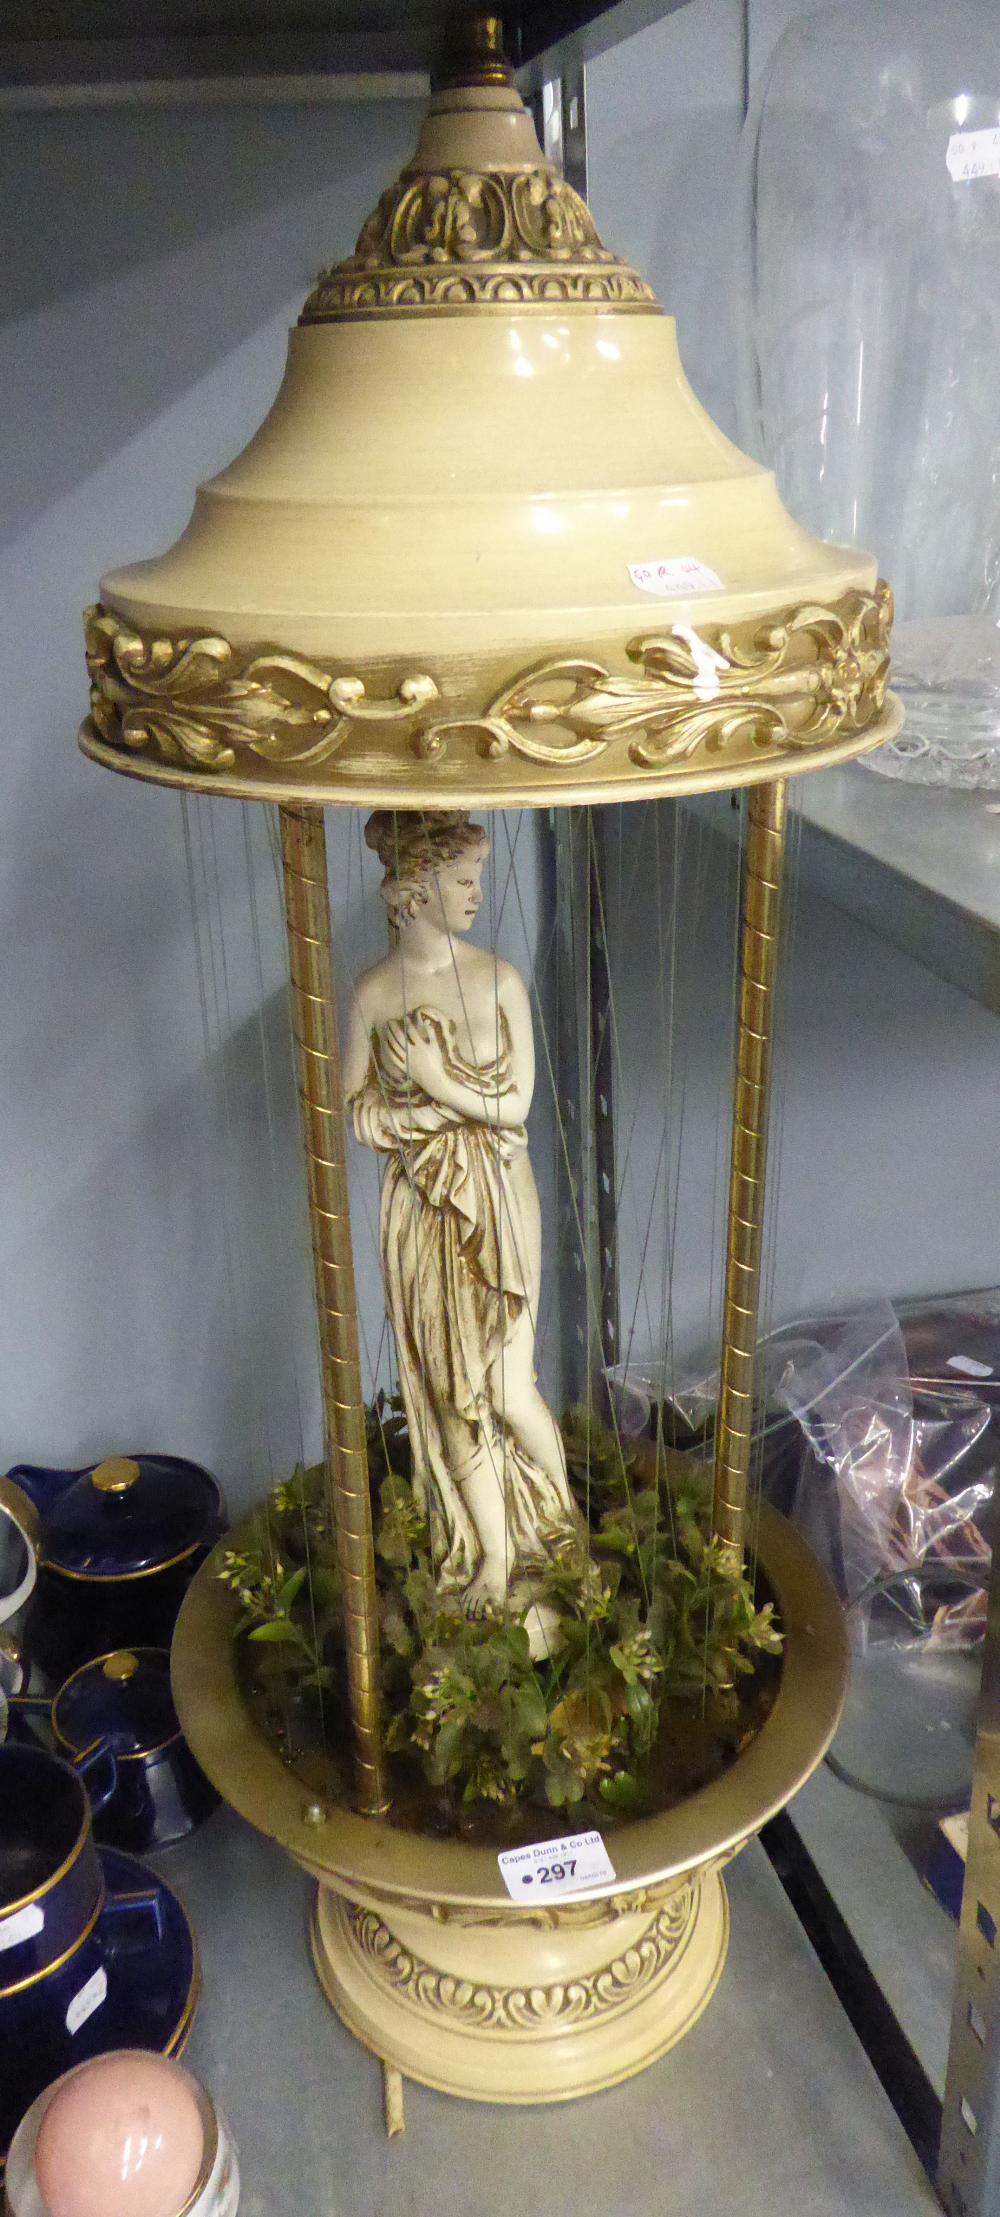 A LARGE DECORATIVE NOVELTY ELECTRIC TABLE LAMP IN THE FORM OF A CLASSICAL FEMALE FIGURE STANDING